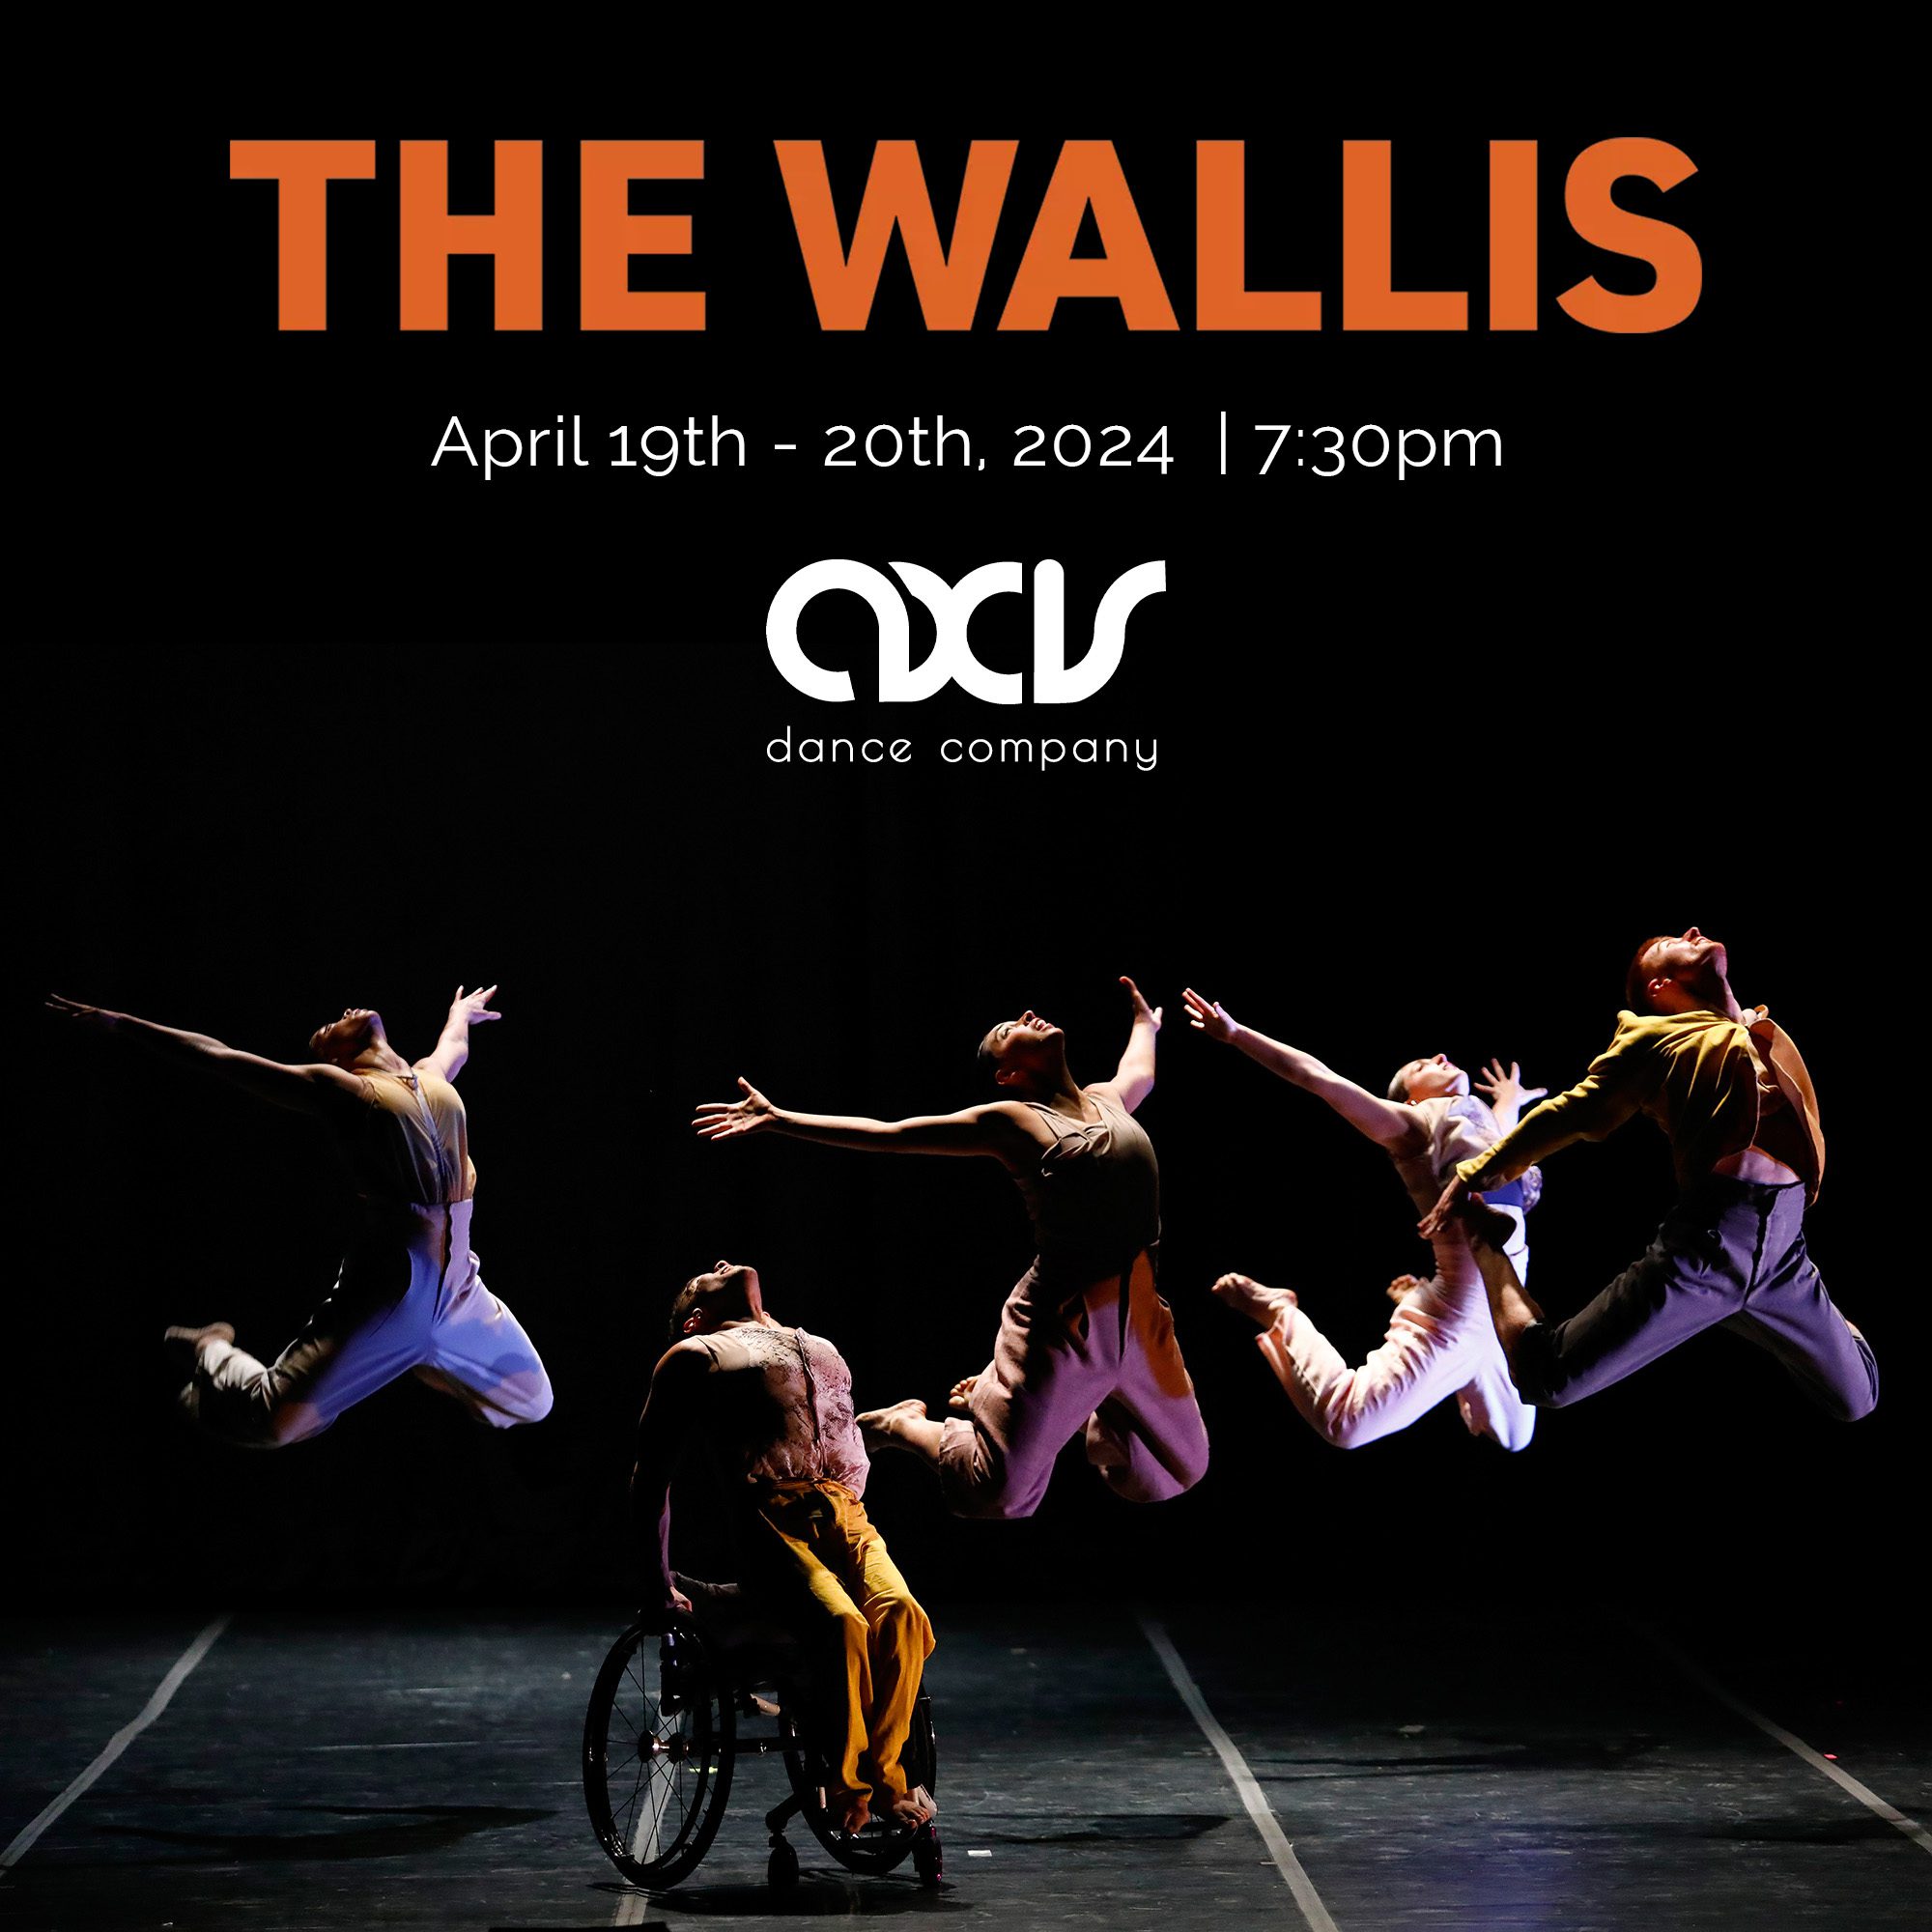 Five disabled and non-disabled dancers lift their bodies with their solar plexus' rising up and out. One dancer pushes themselves out of their wheelchair with their hands, four dancers leap up with arms and legs stretched out behind them. AXIS and the Wallis logos are placed next to performance date information.